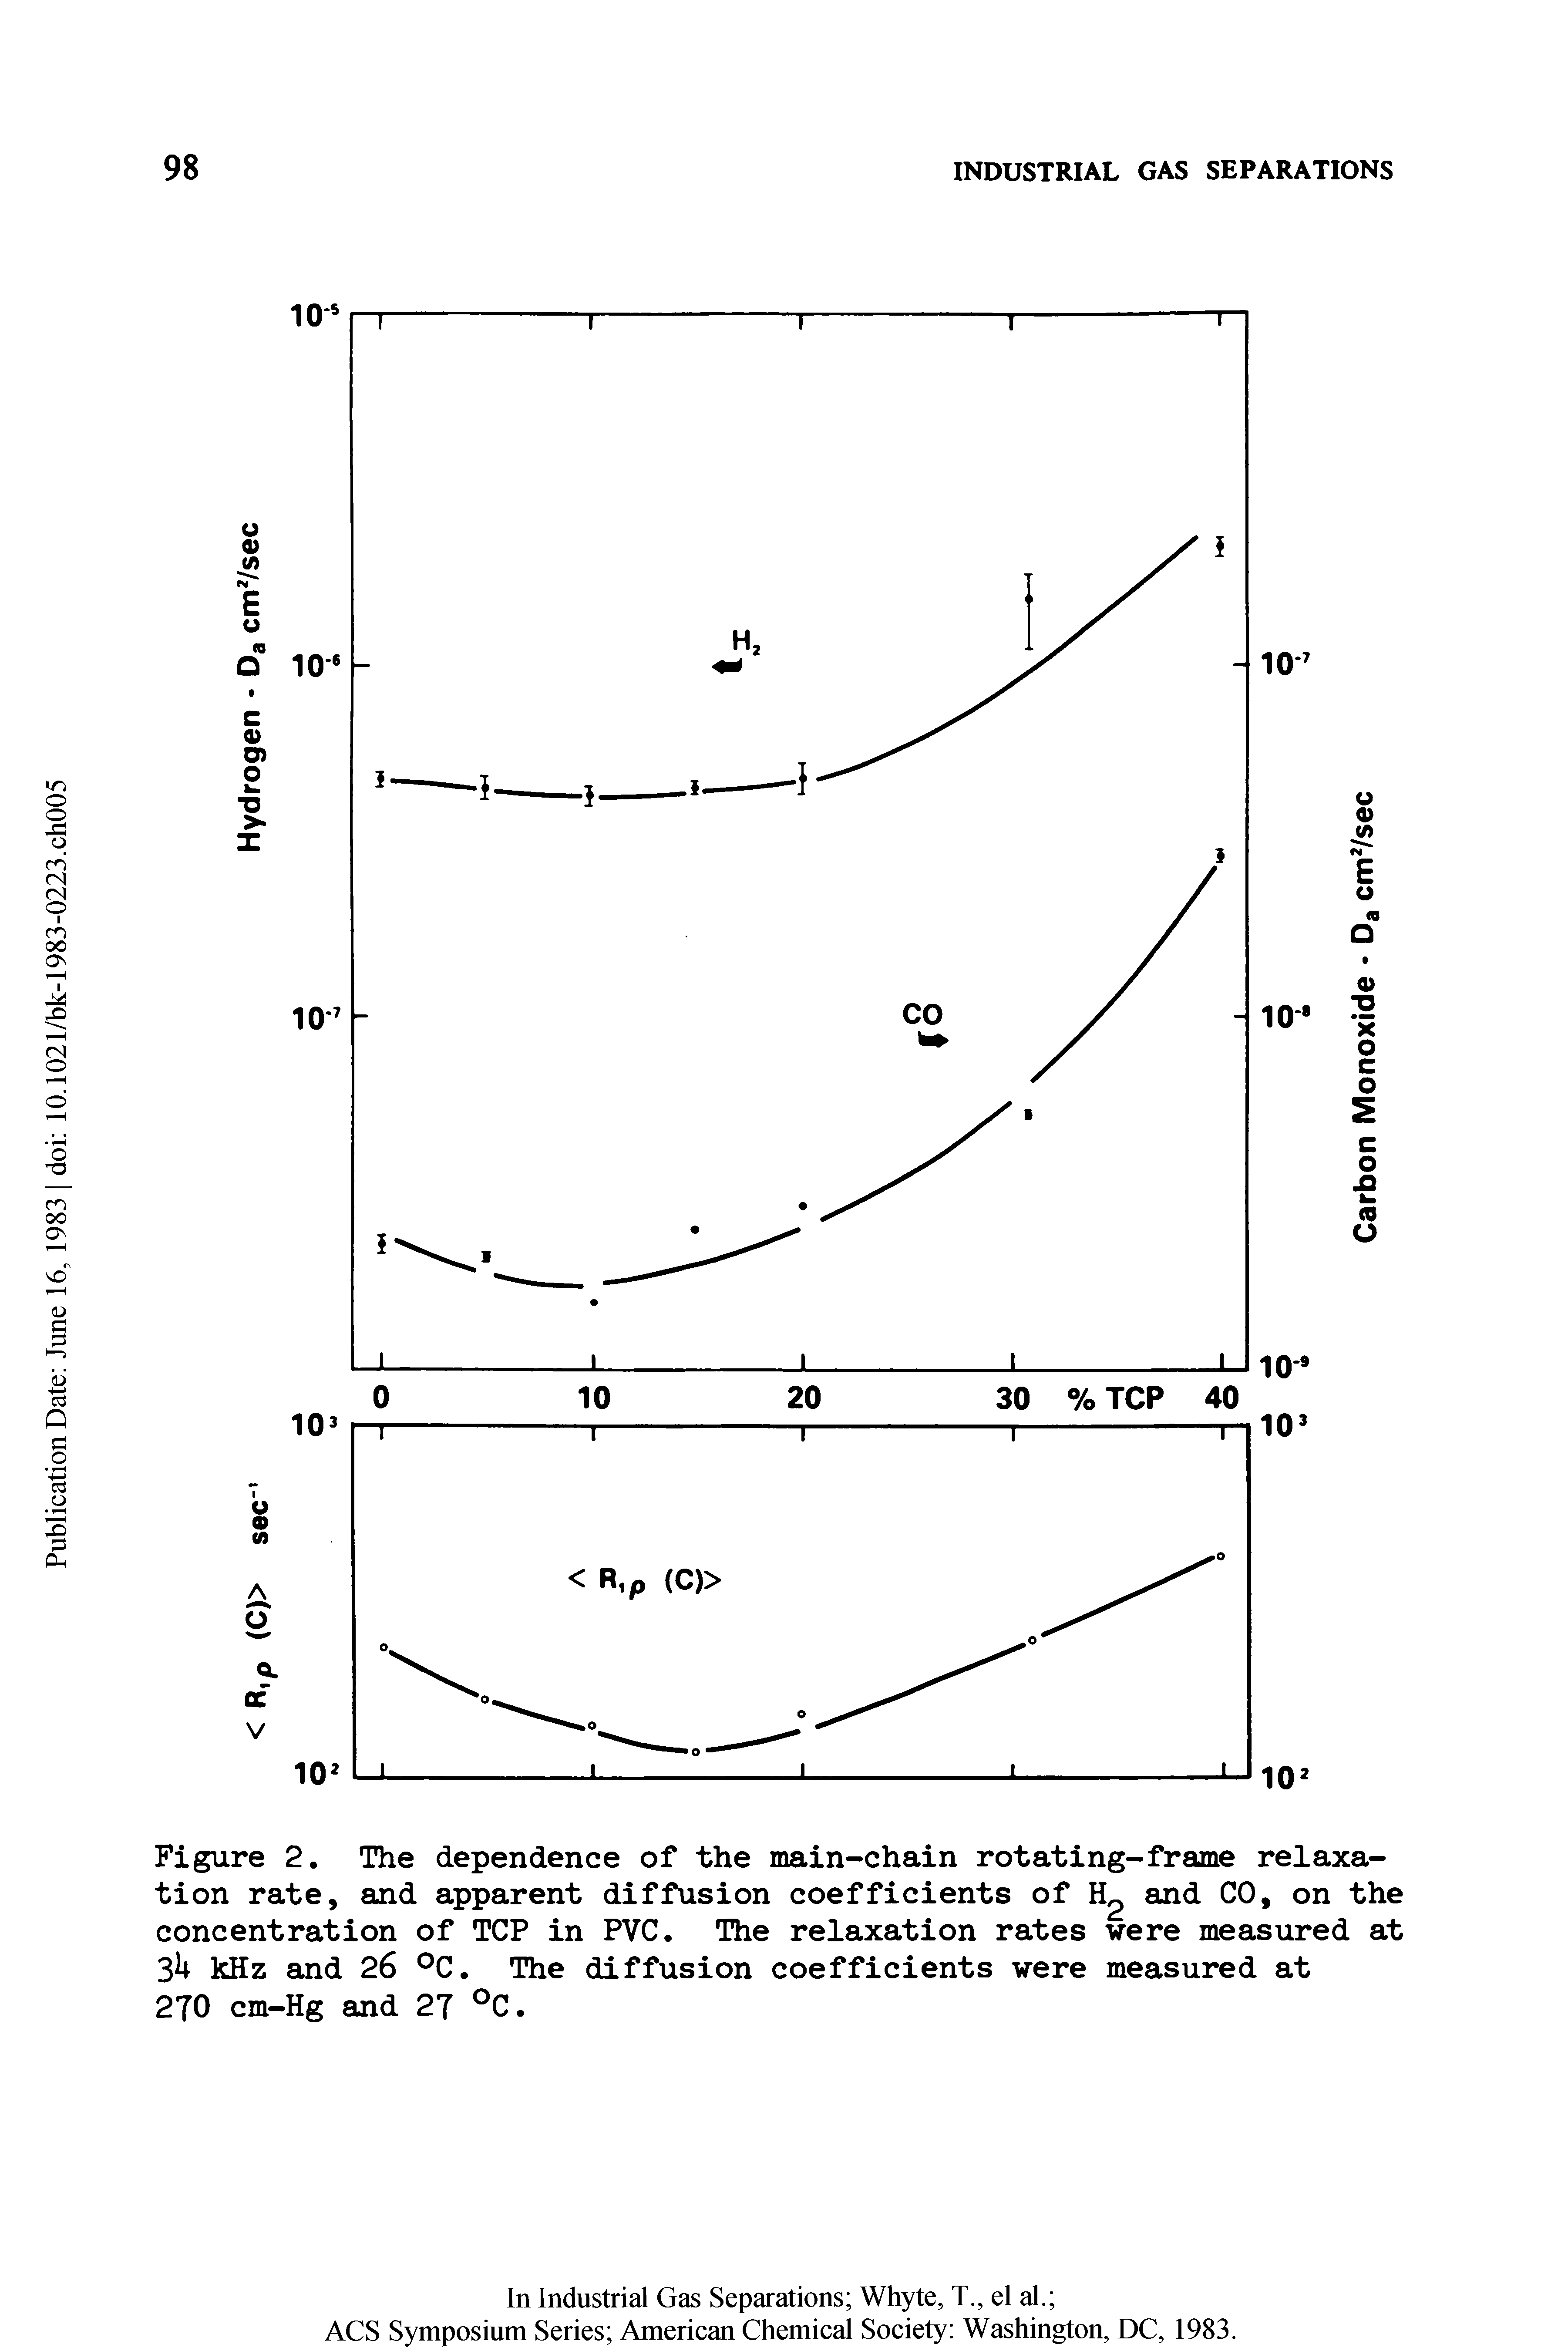 Figure 2. The dependence of the main-chain rotating-frame relaxation rate, and apparent diffusion coefficients of H2 and CO, on the concentration of TCP in PVC. The relaxation rates were measured at 3U kHz and 26 °C. The diffusion coefficients were measured at 270 cm-Hg and 27 °C.